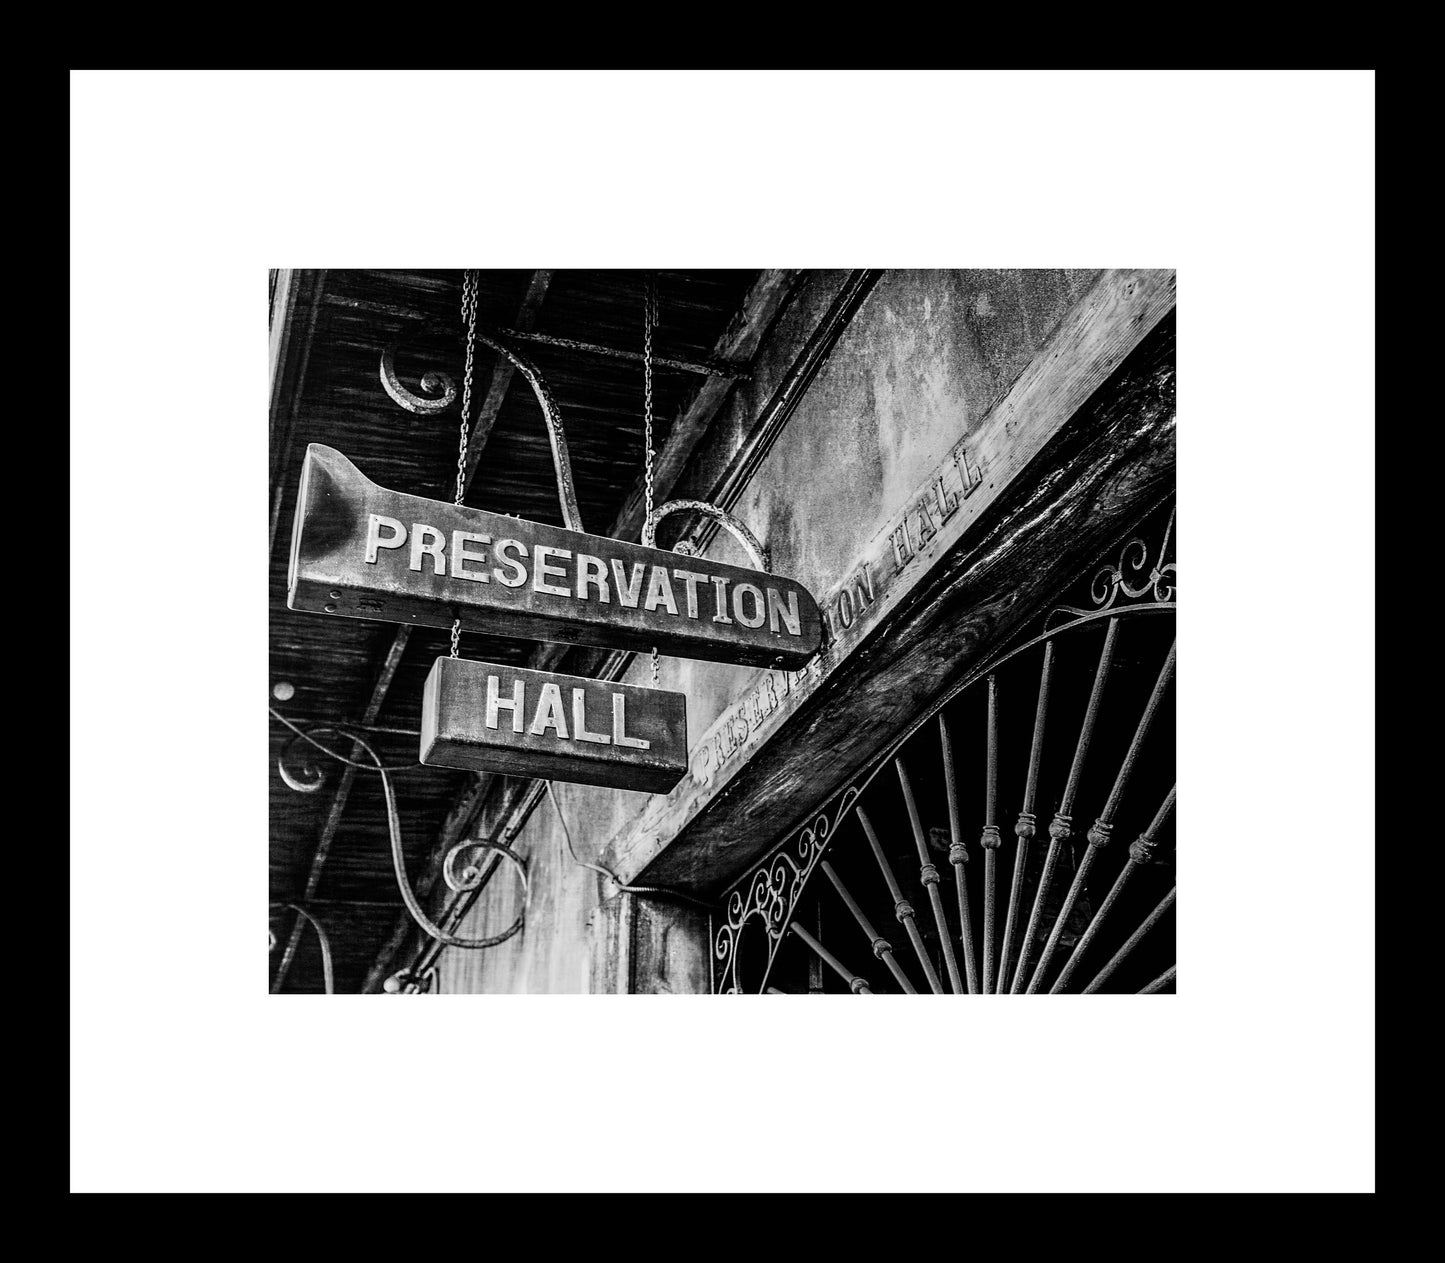 Black and White New Orleans Gallery Wall Print Set